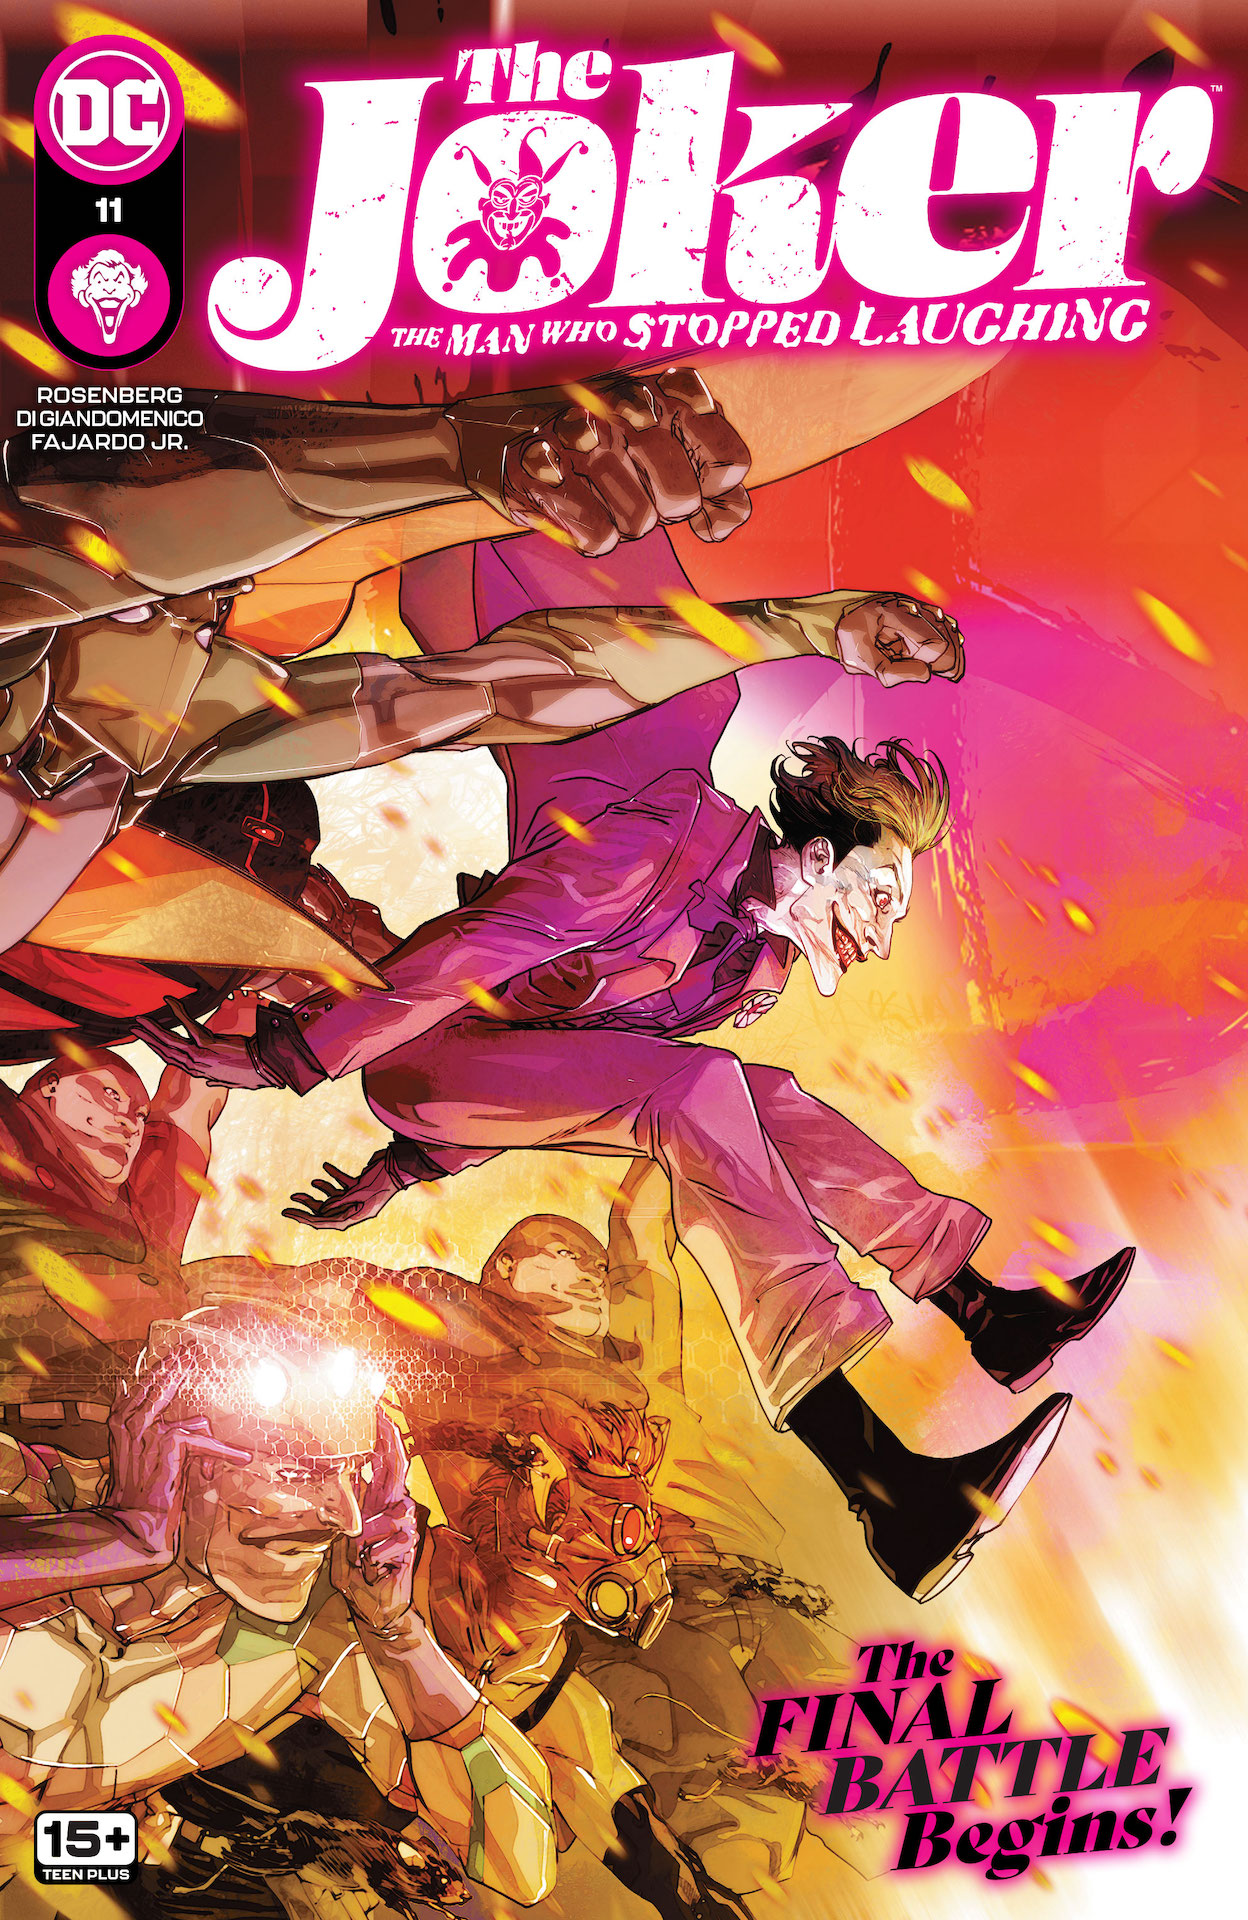 DC Preview: The Joker: The Man Who Stopped Laughing #11